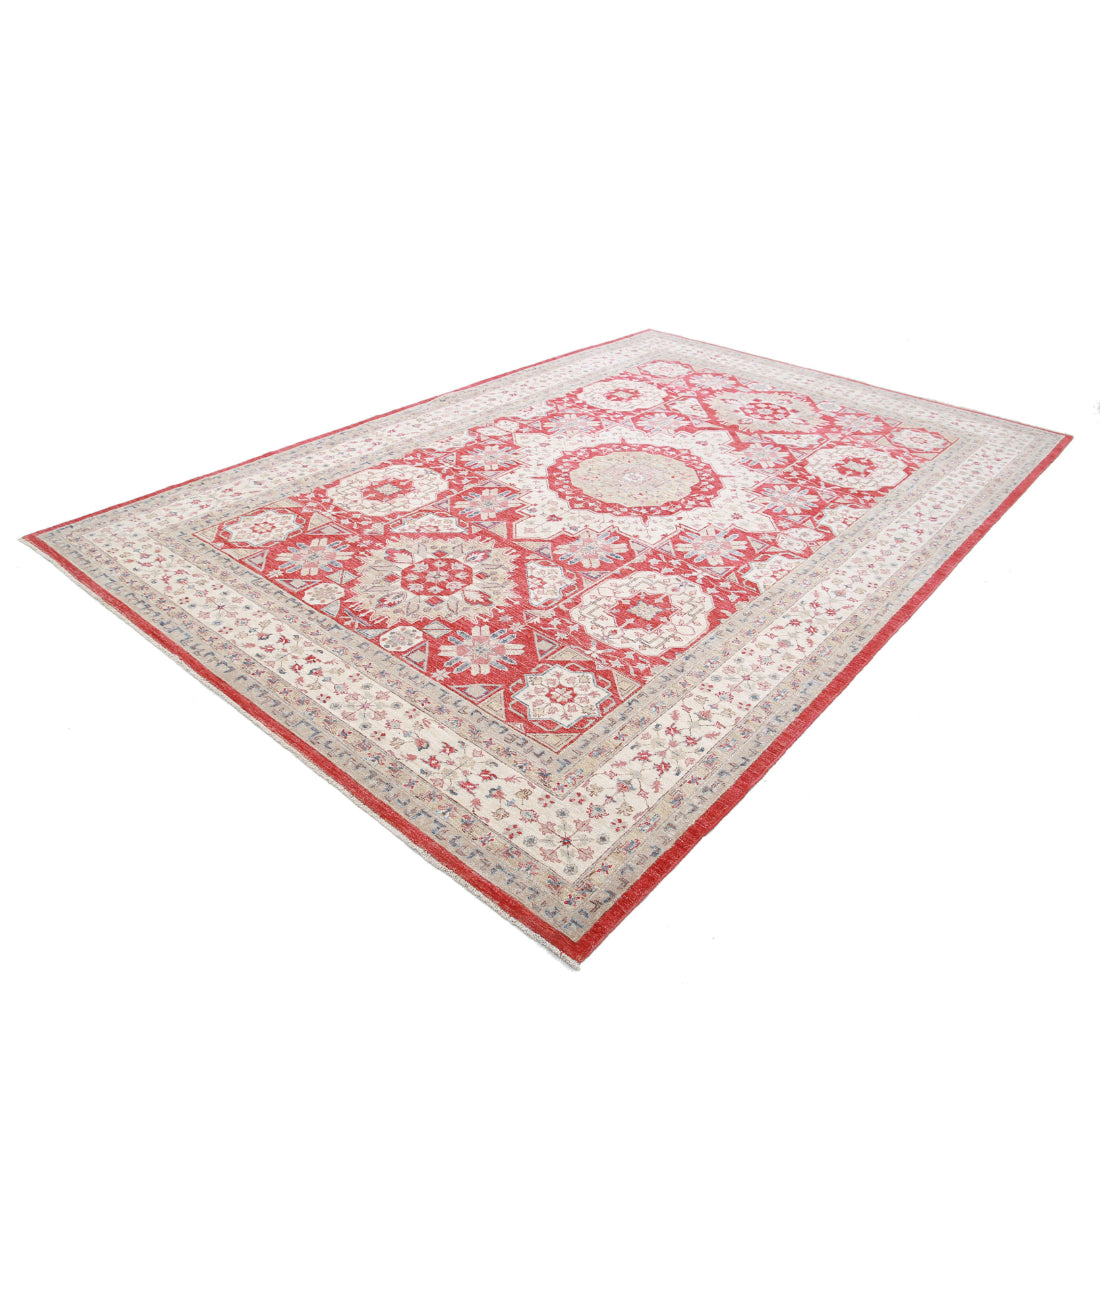 Ziegler 8'3'' X 12'4'' Hand-Knotted Wool Rug 8'3'' x 12'4'' (248 X 370) / Red / Ivory